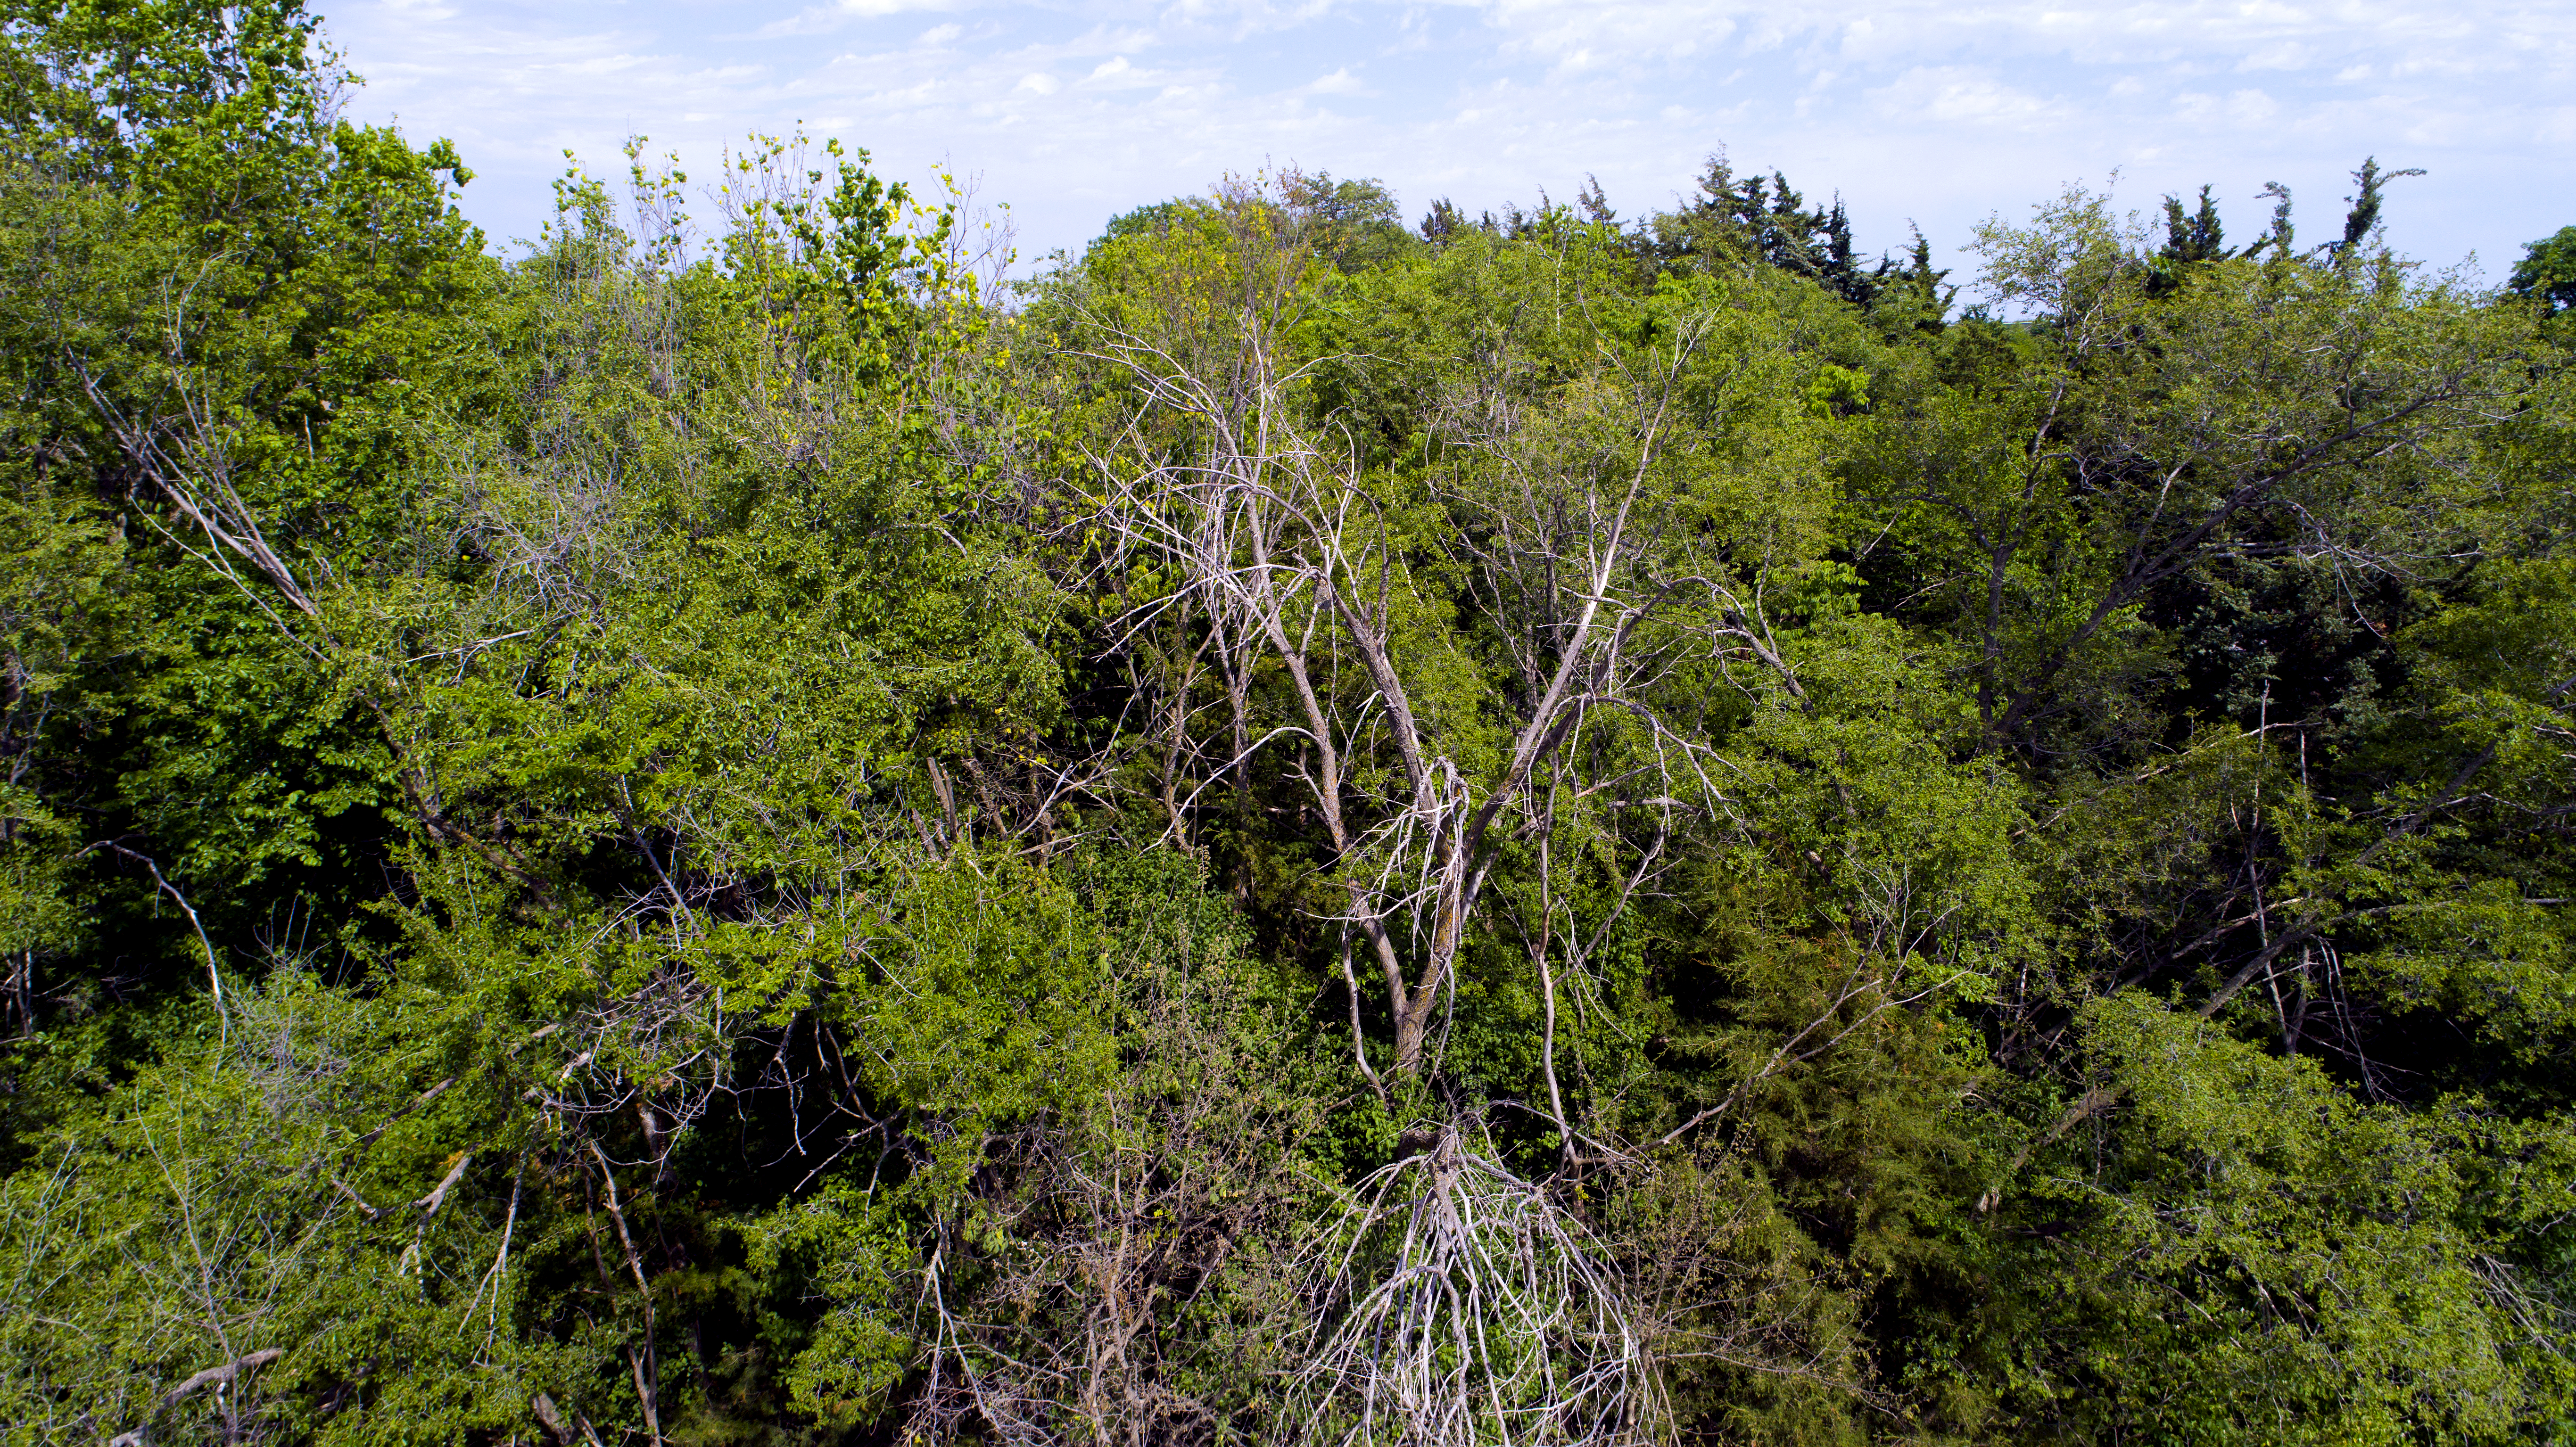 Wide shelterbelts provide forest-like cover for birds and other wildlife.